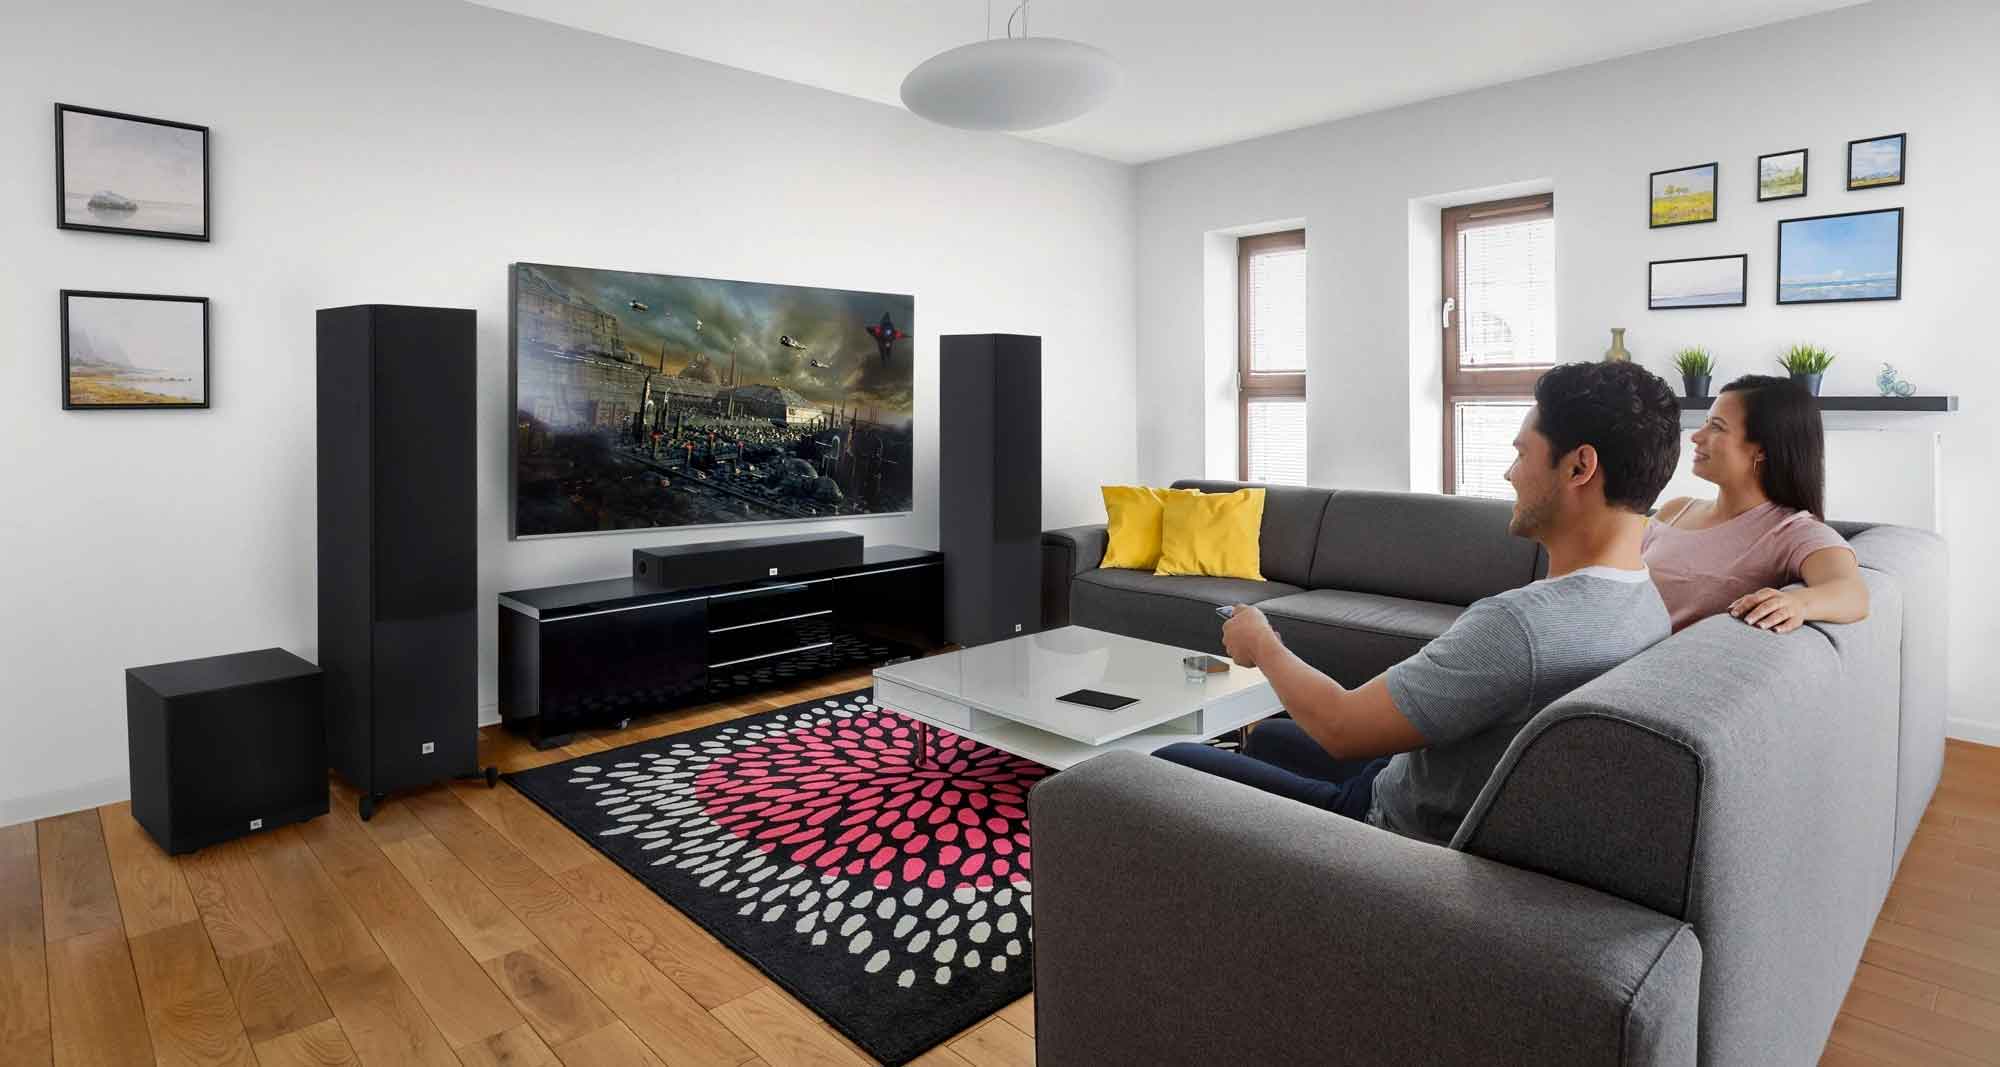 Home audio solutions